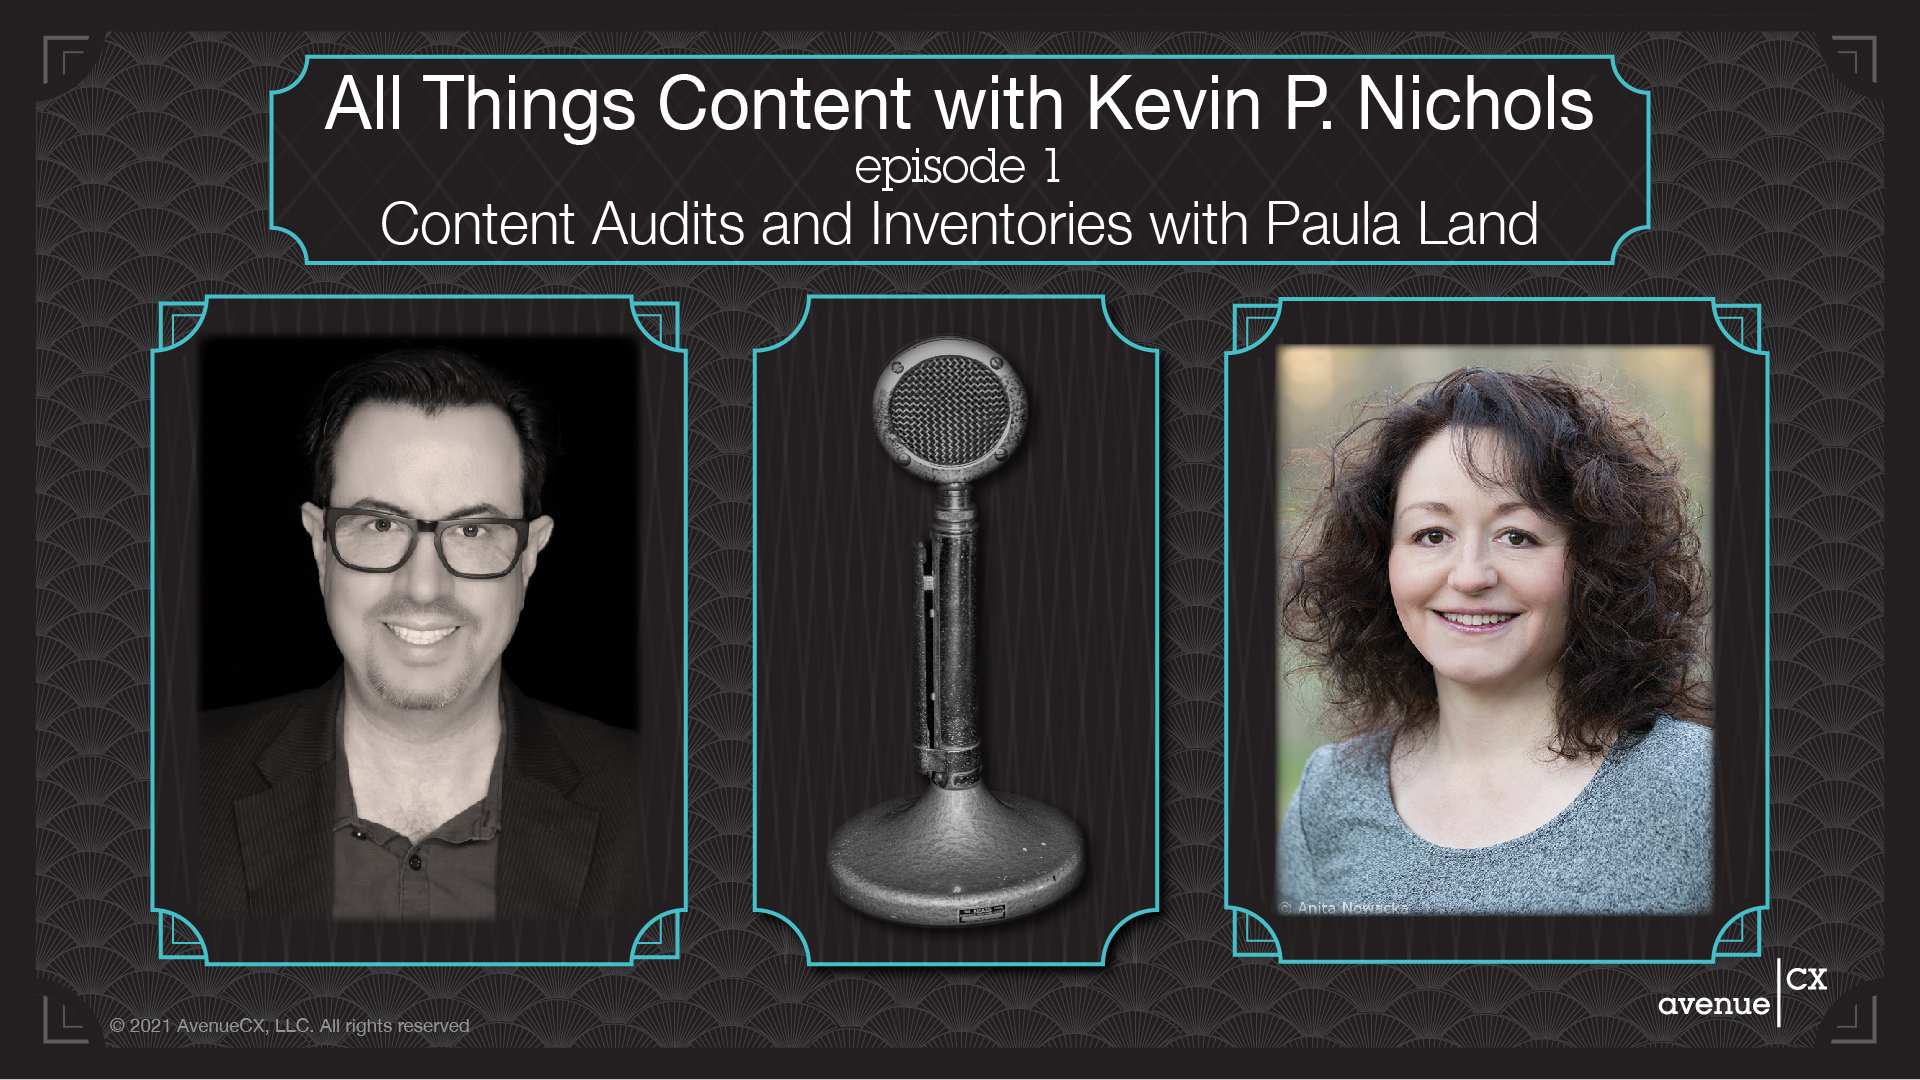 Kevin P Nichols' All Things Content Podcast Featuring Paula Land on Content Inventories and Audits.